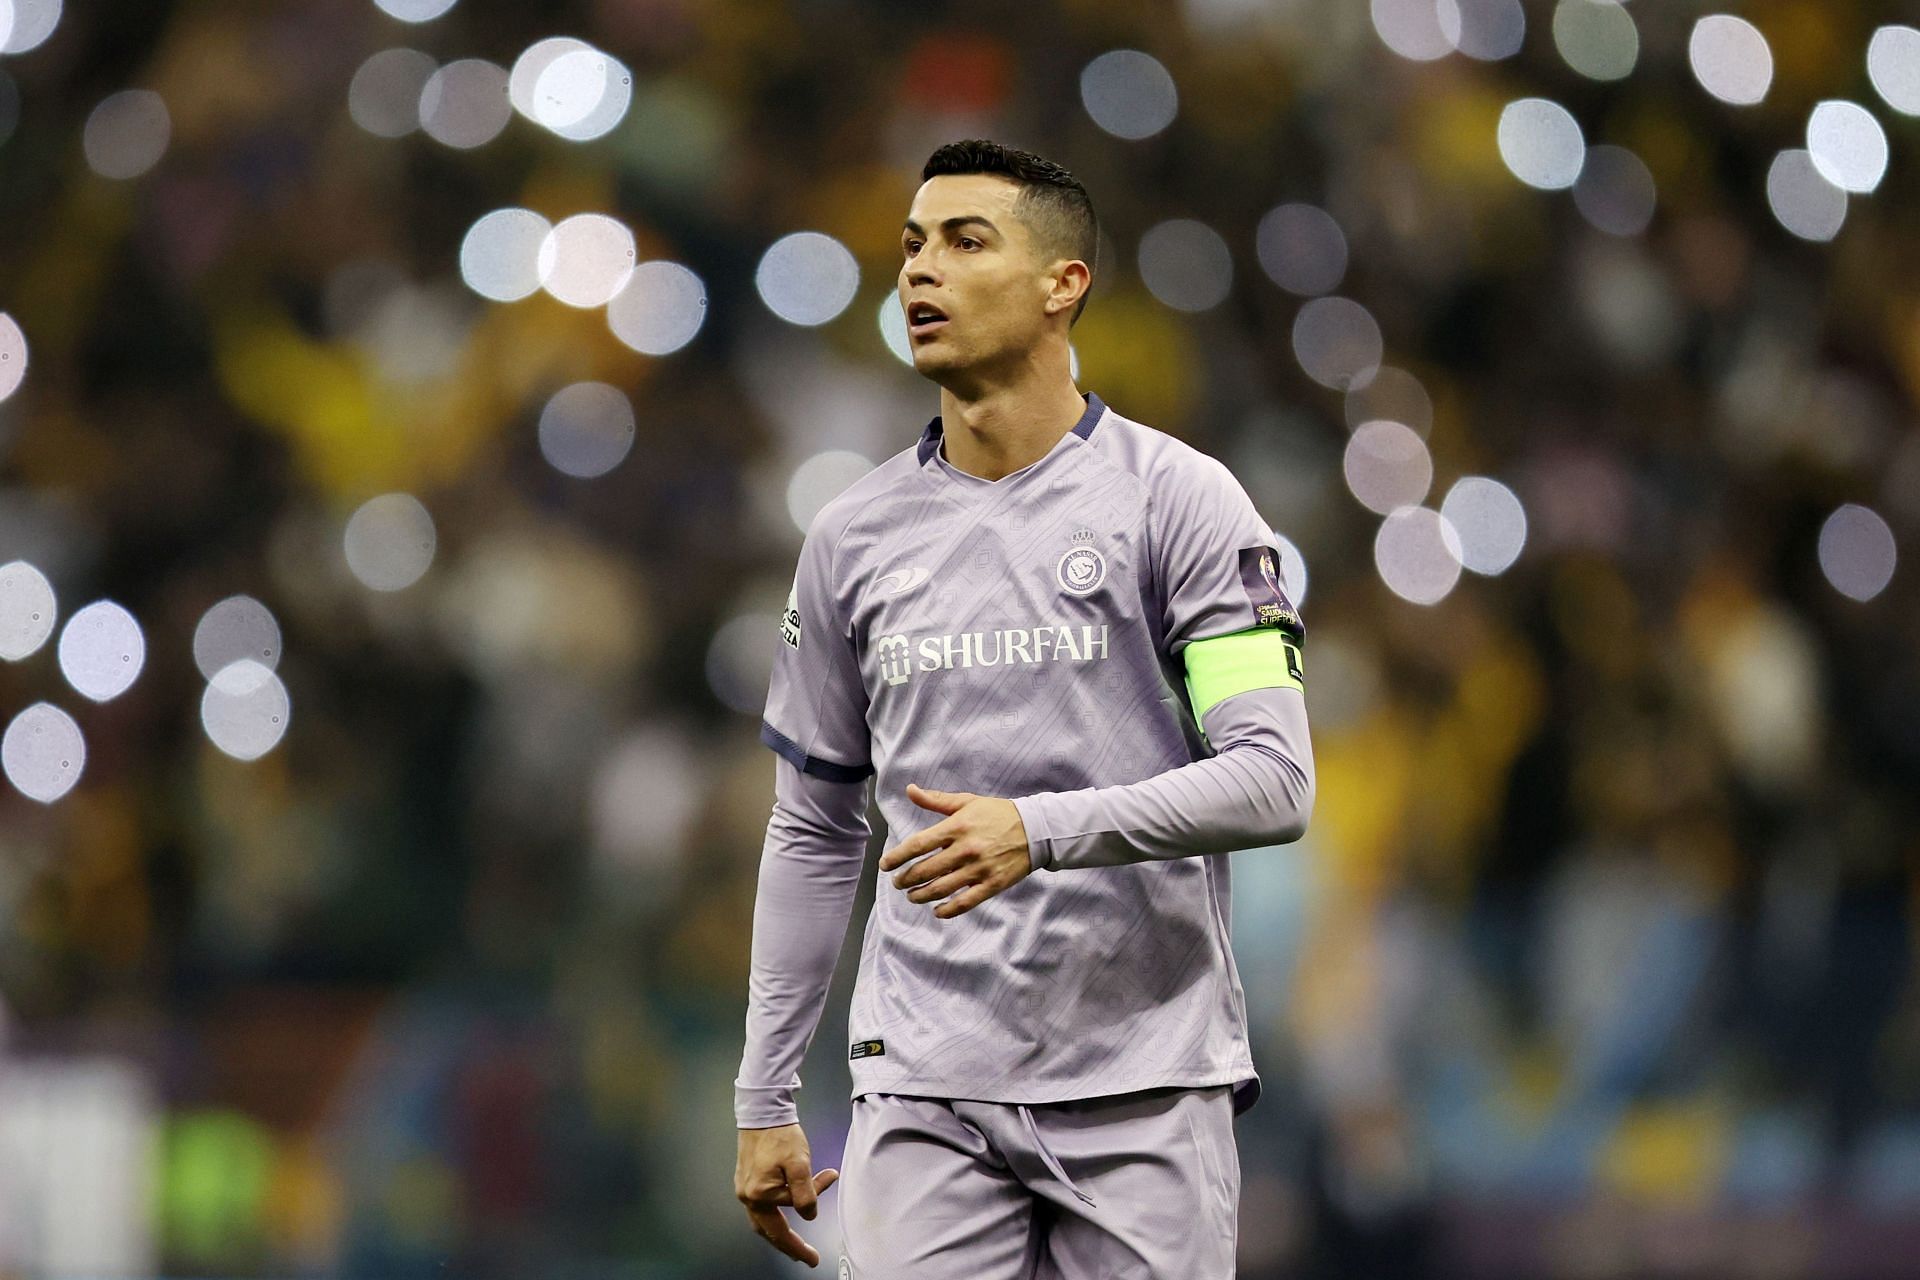 13,550 Cristiano Ronaldo Royalty-Free Photos and Stock Images | Shutterstock